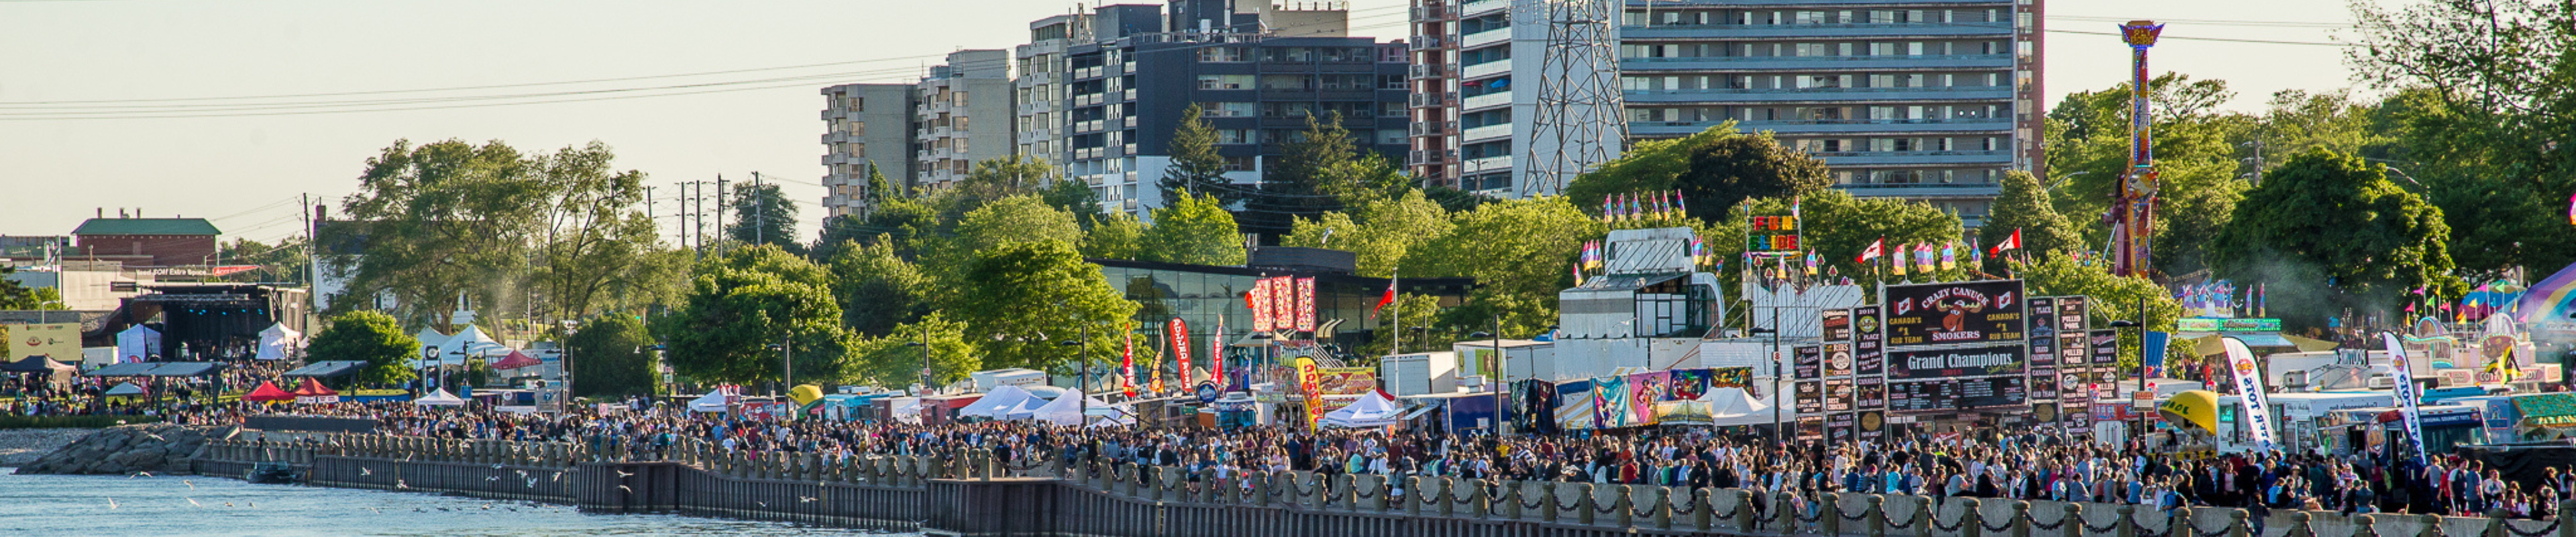 image of Sound Of Music Festival during the day